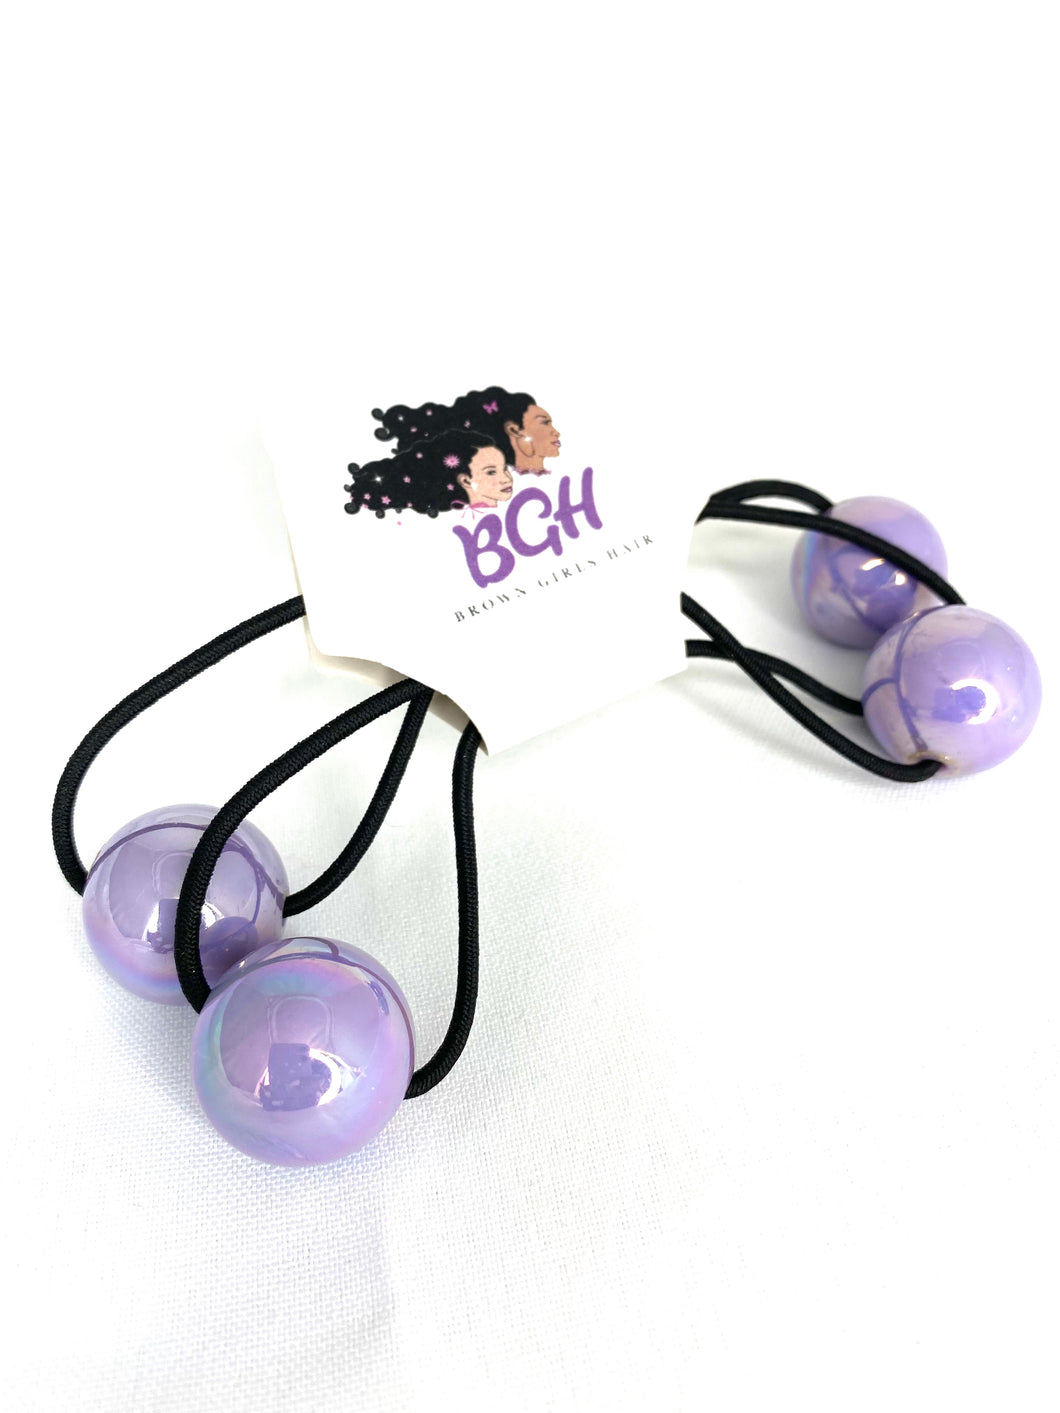 Brown Girls Hair *NEW* Iridescent Bubble Gum Ponytail Holders